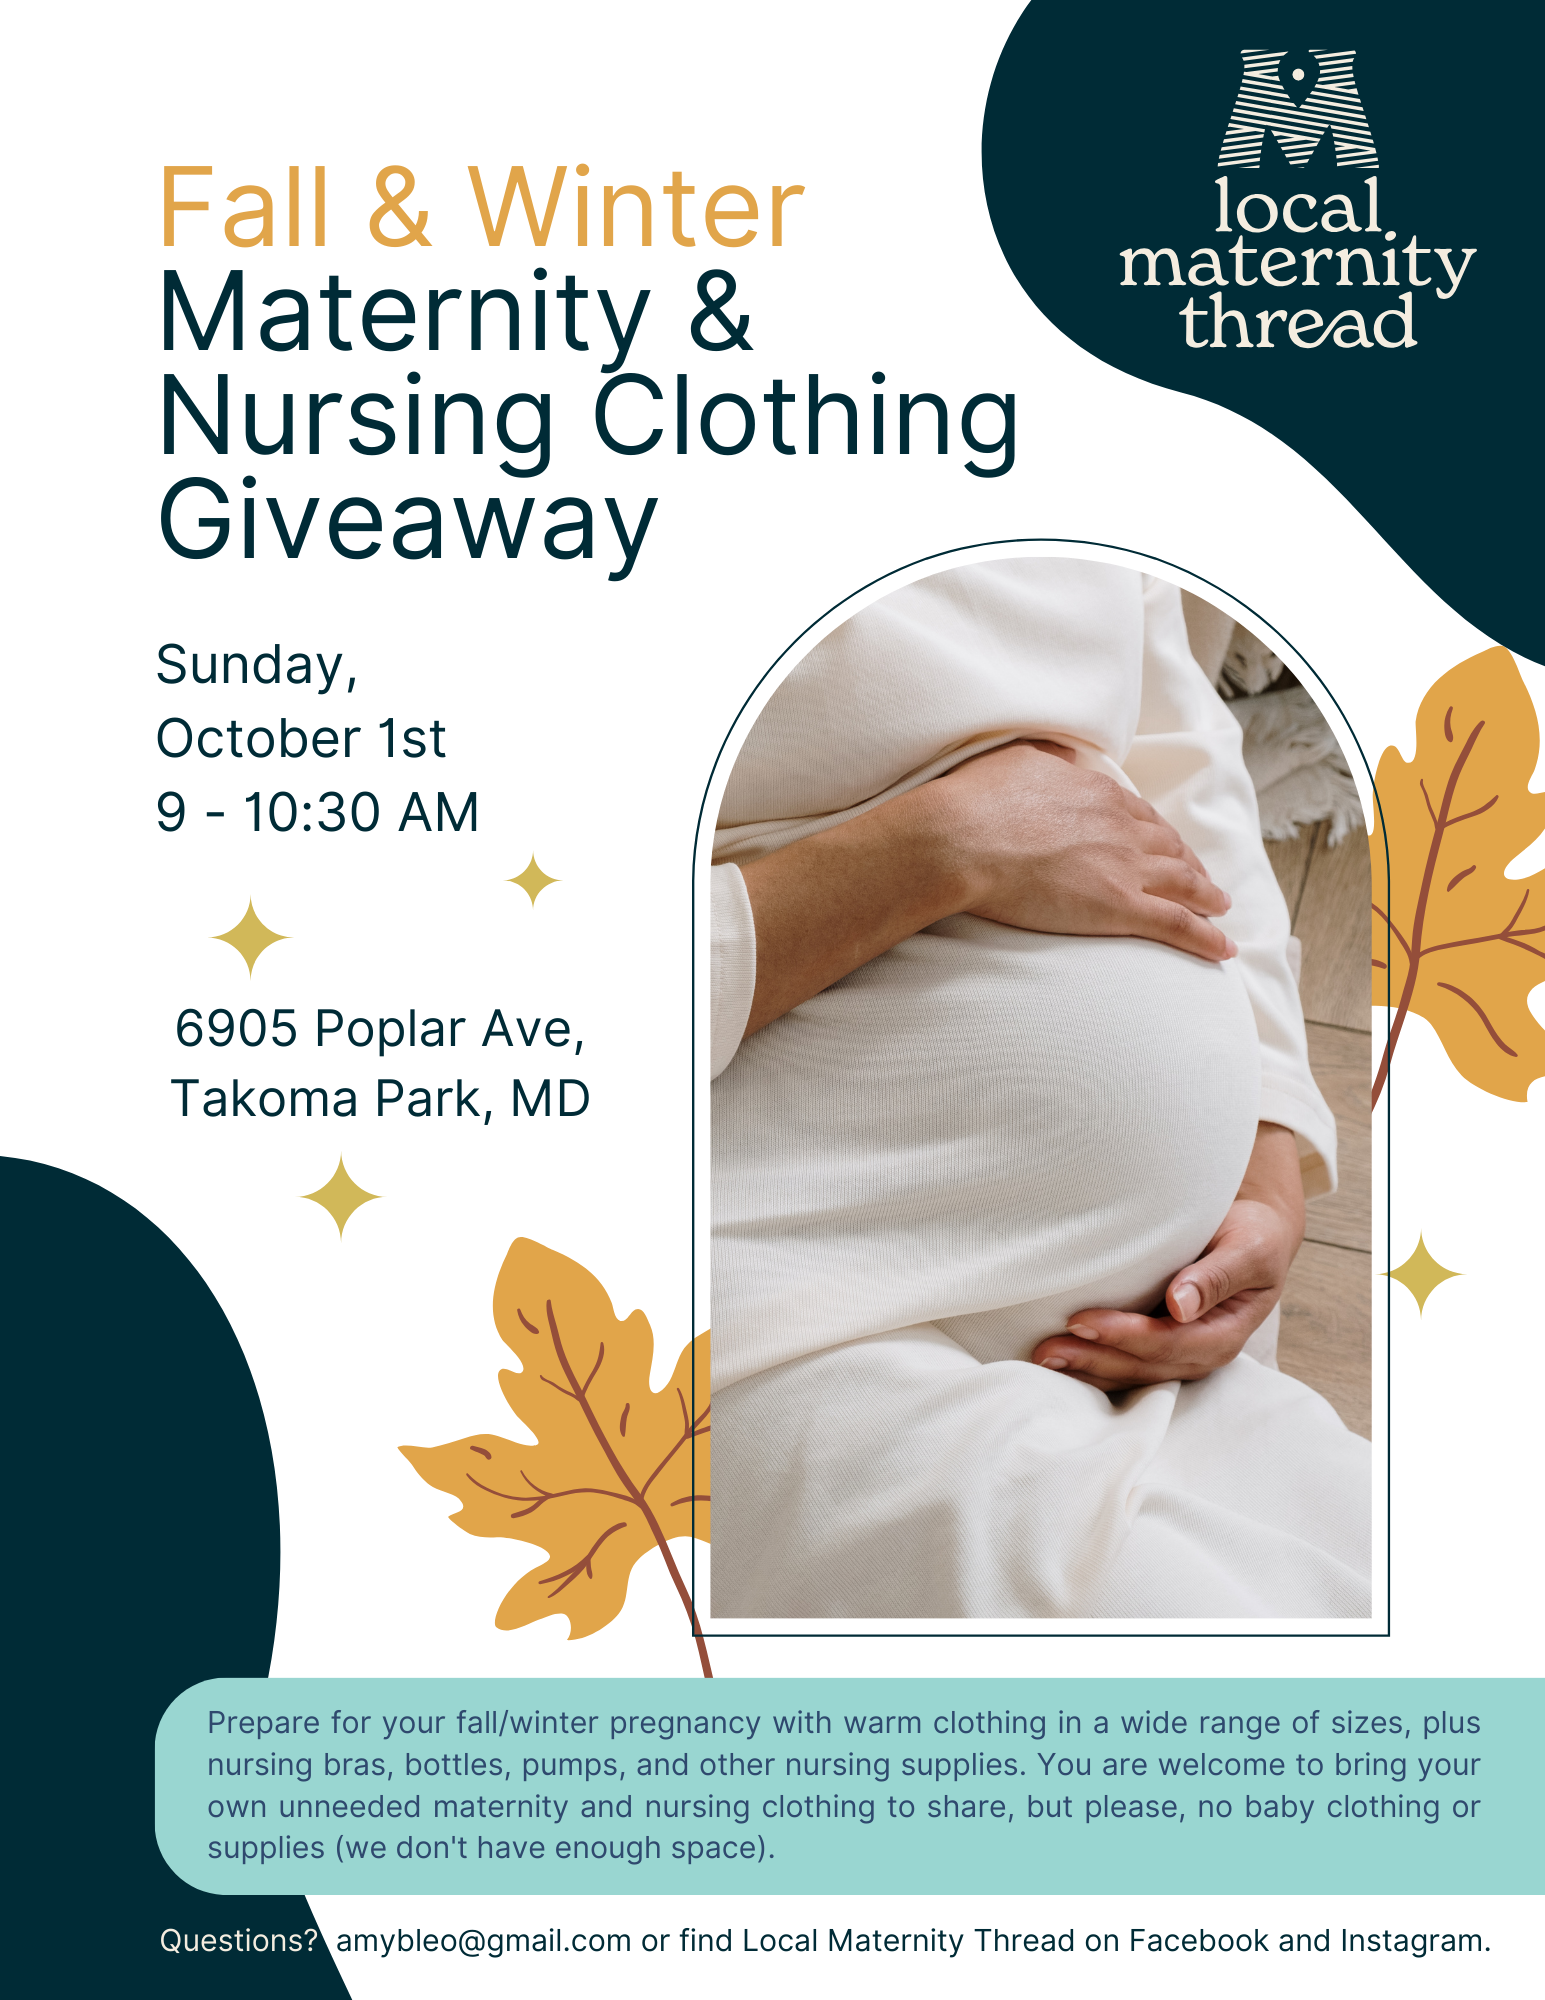 Fall & Winter Maternity & Nursing Clothing Giveaway